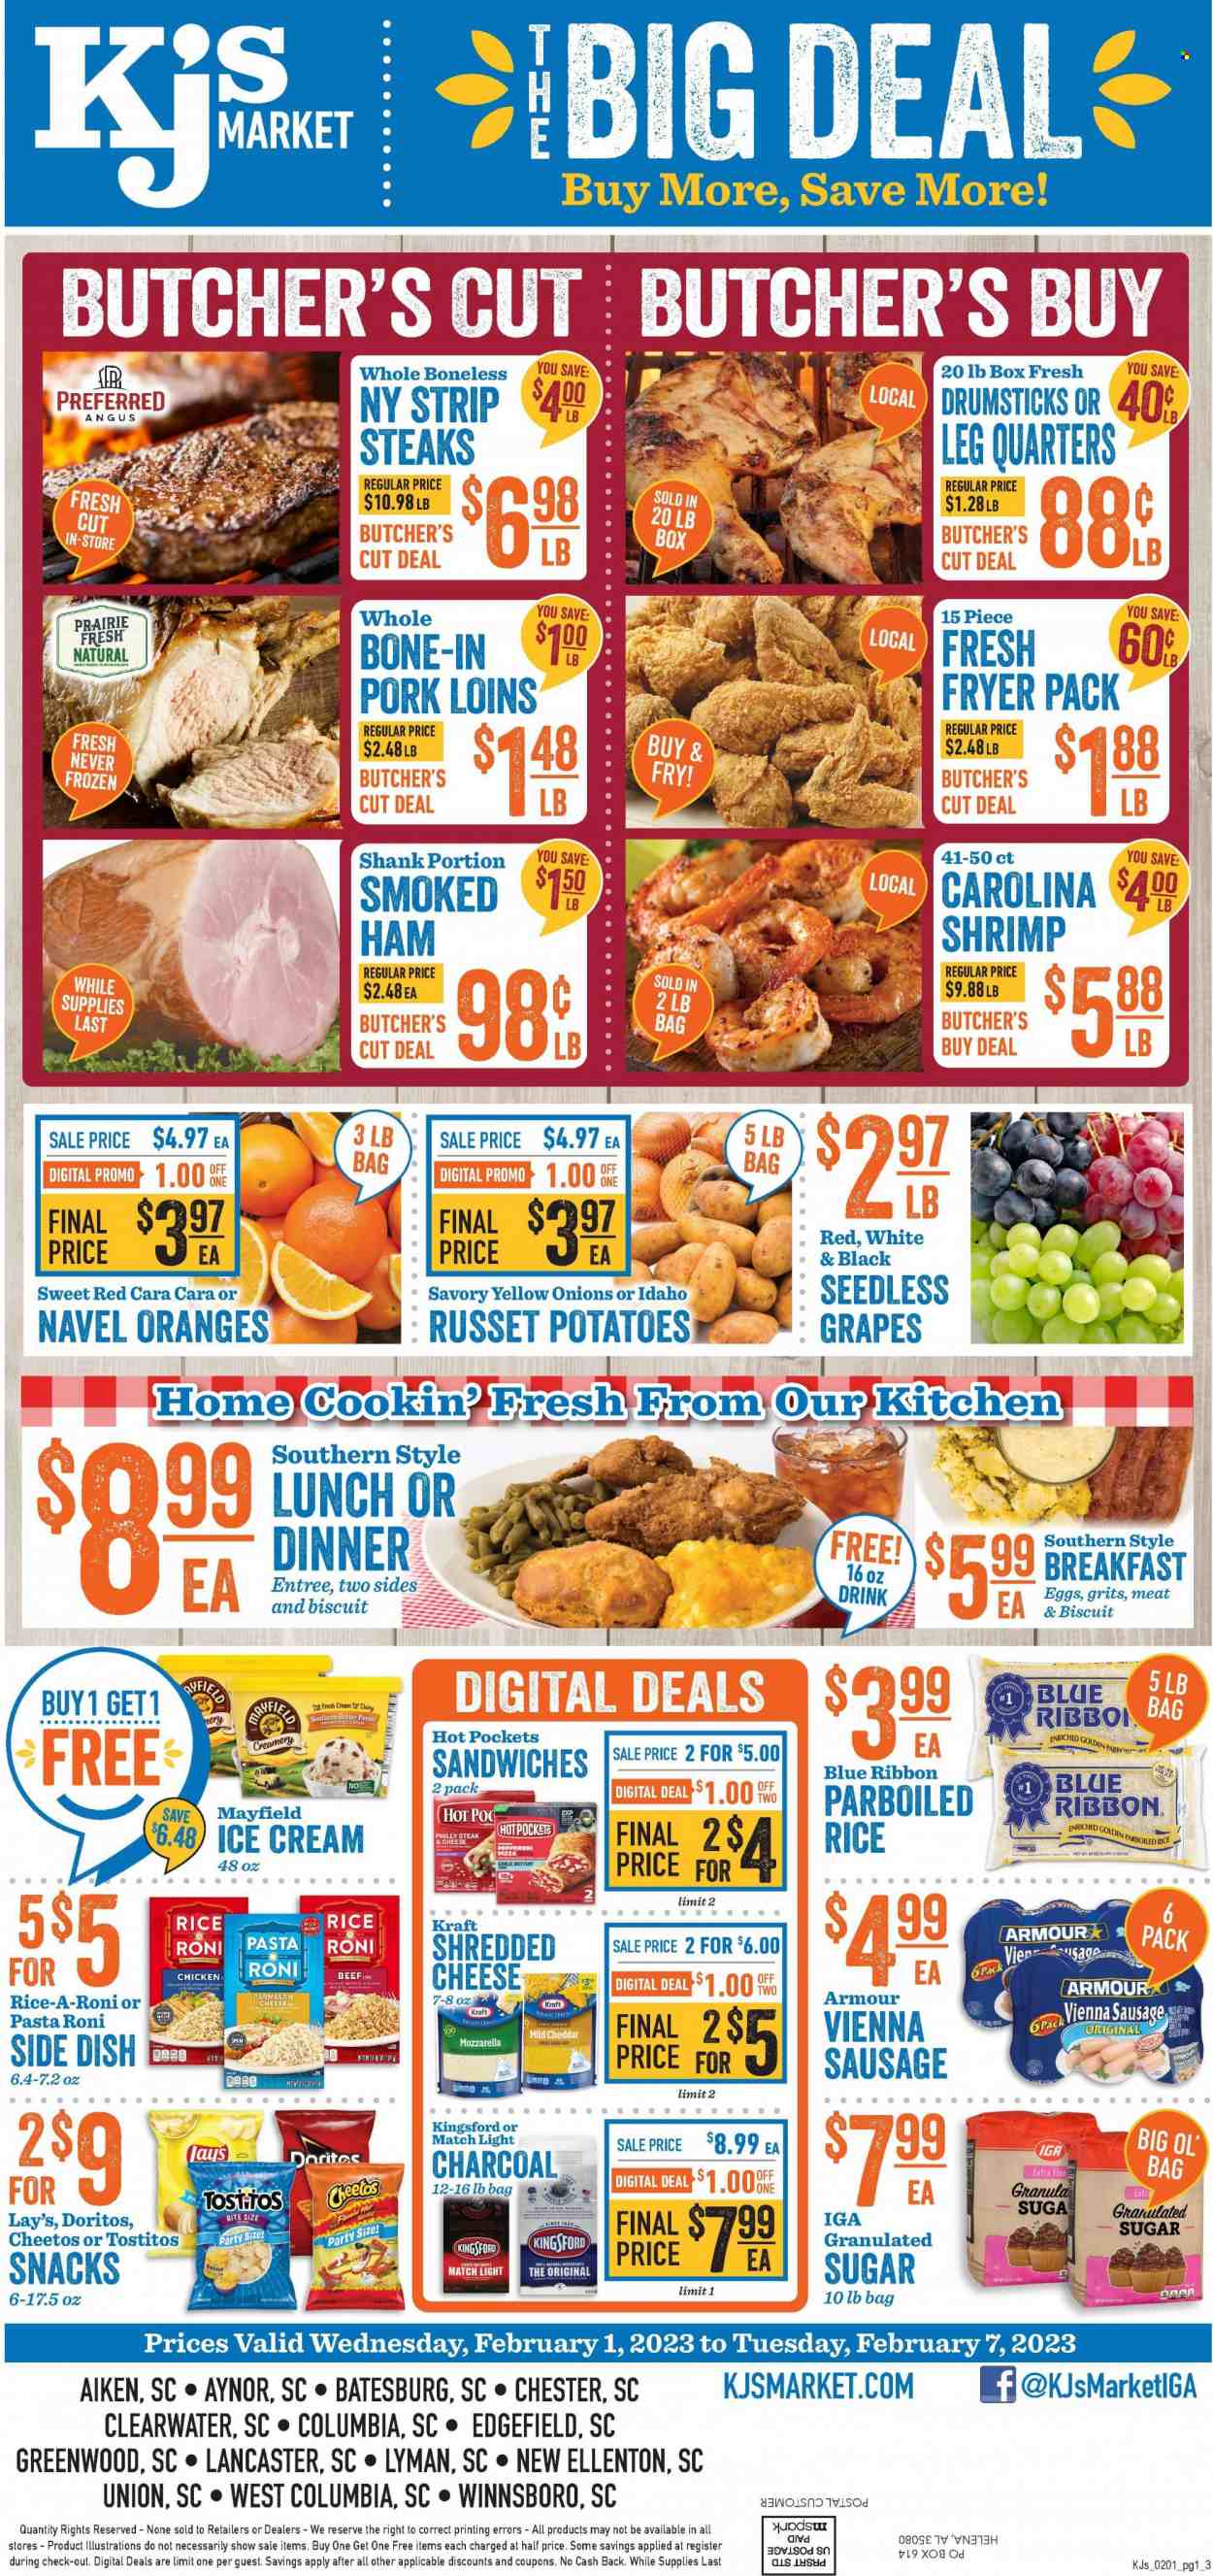 thumbnail - KJ´s Market Flyer - 02/01/2023 - 02/07/2023 - Sales products - garlic, russet potatoes, potatoes, onion, grapes, seedless grapes, oranges, shrimps, hot pocket, pizza, Kraft®, Kingsford, ham, smoked ham, sausage, vienna sausage, pepperoni, mild cheddar, shredded cheese, cheddar, parmesan, eggs, snack, biscuit, Doritos, Cheetos, Lay’s, Tostitos, granulated sugar, sugar, grits, rice, parboiled rice, steak, pin, charcoal, navel oranges. Page 1.